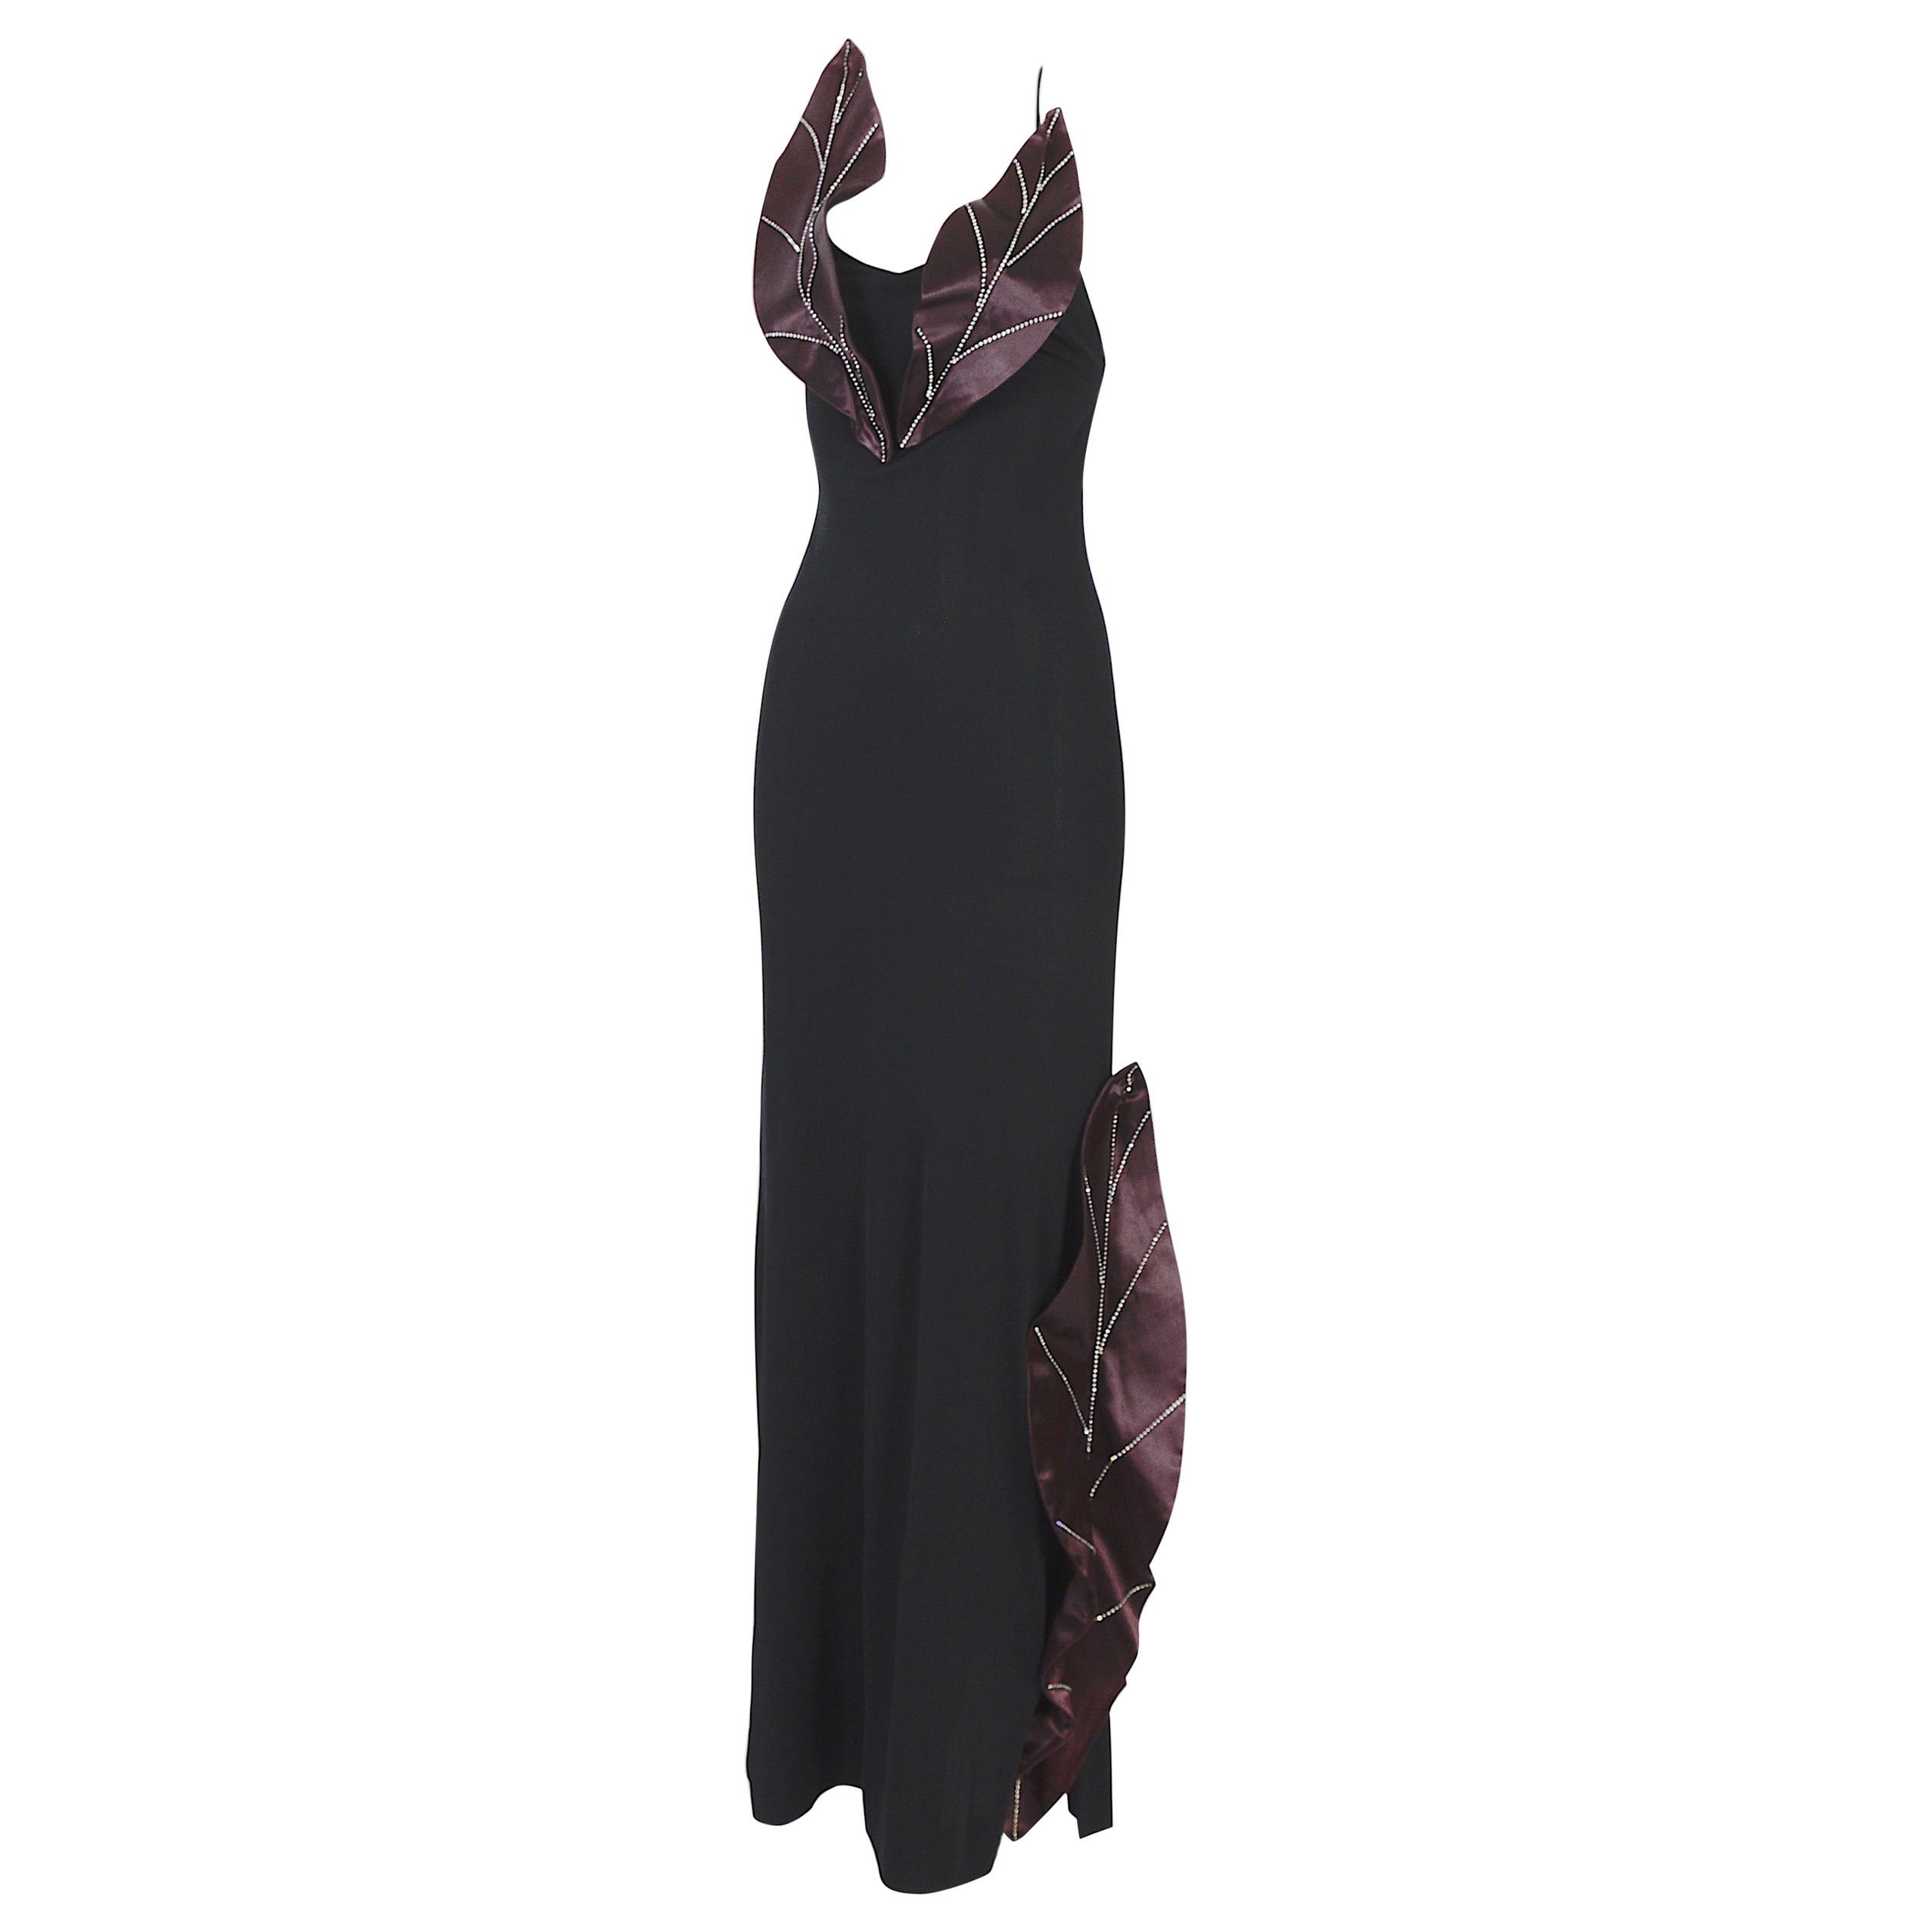 Loris Azzaro couture 1970s black satin & strass embellished silk jersey dress  For Sale